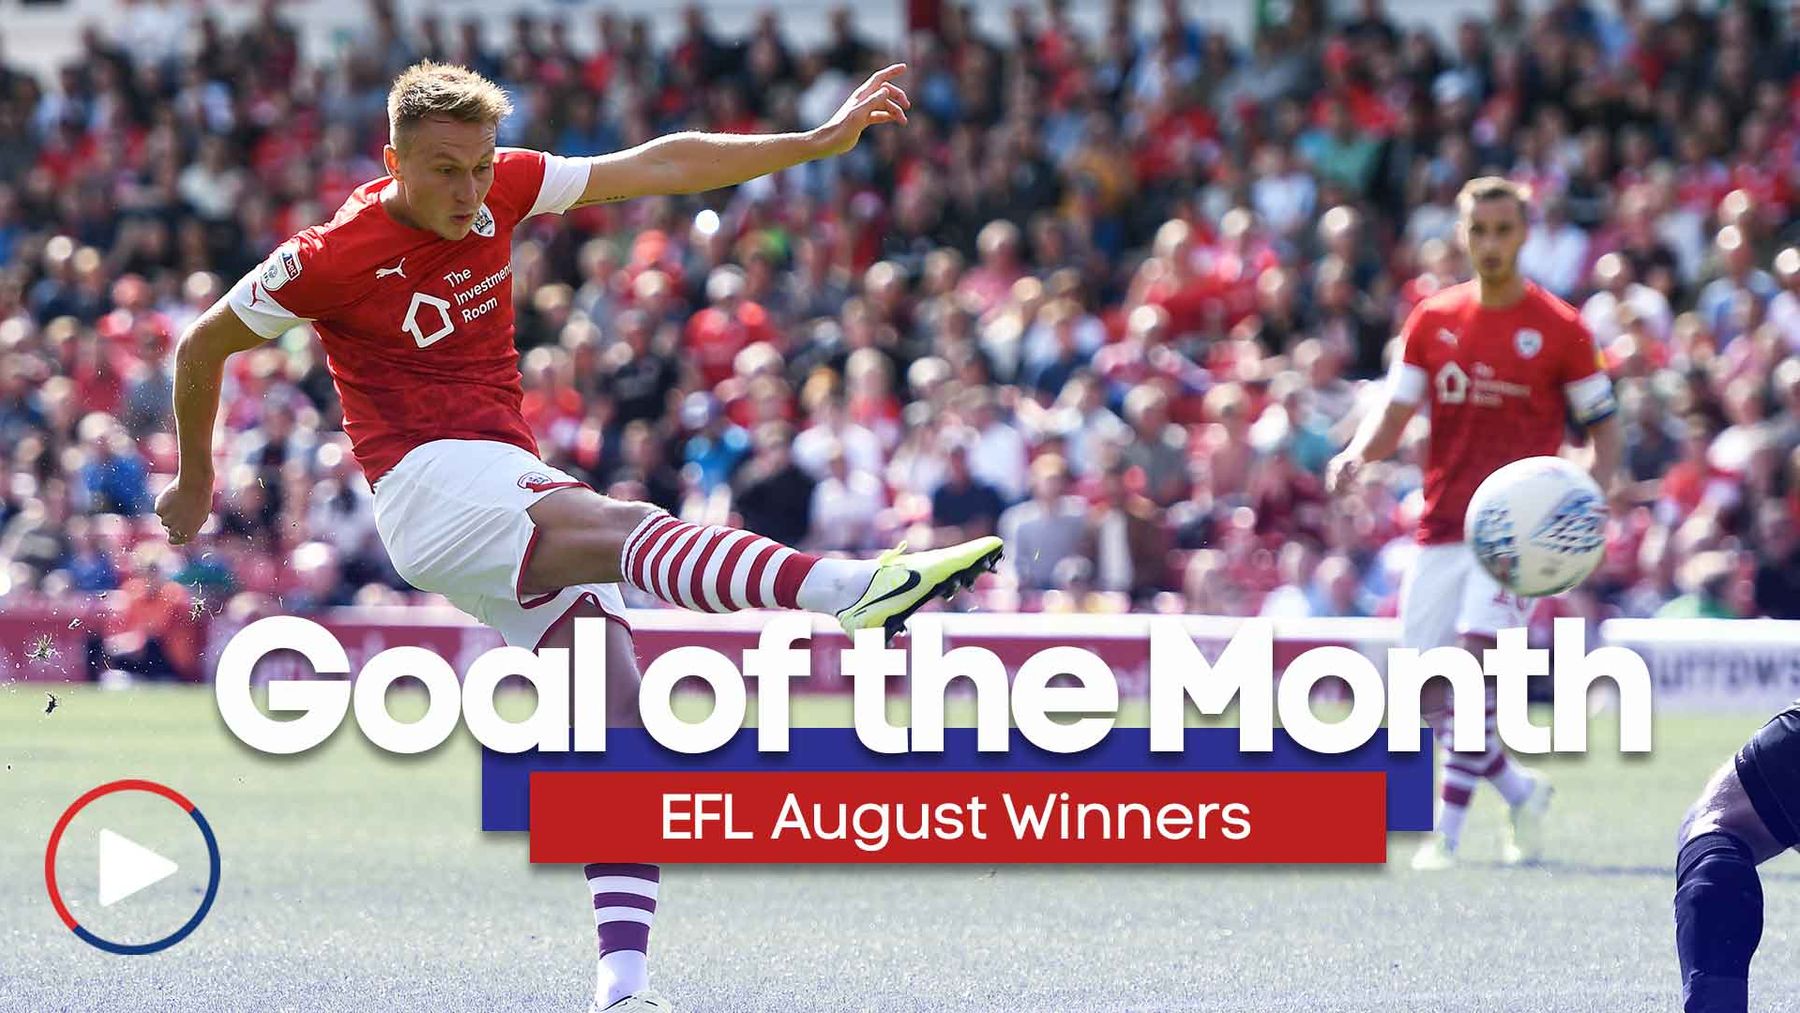 See the Sky Bet Goal of the Month August winners - The English